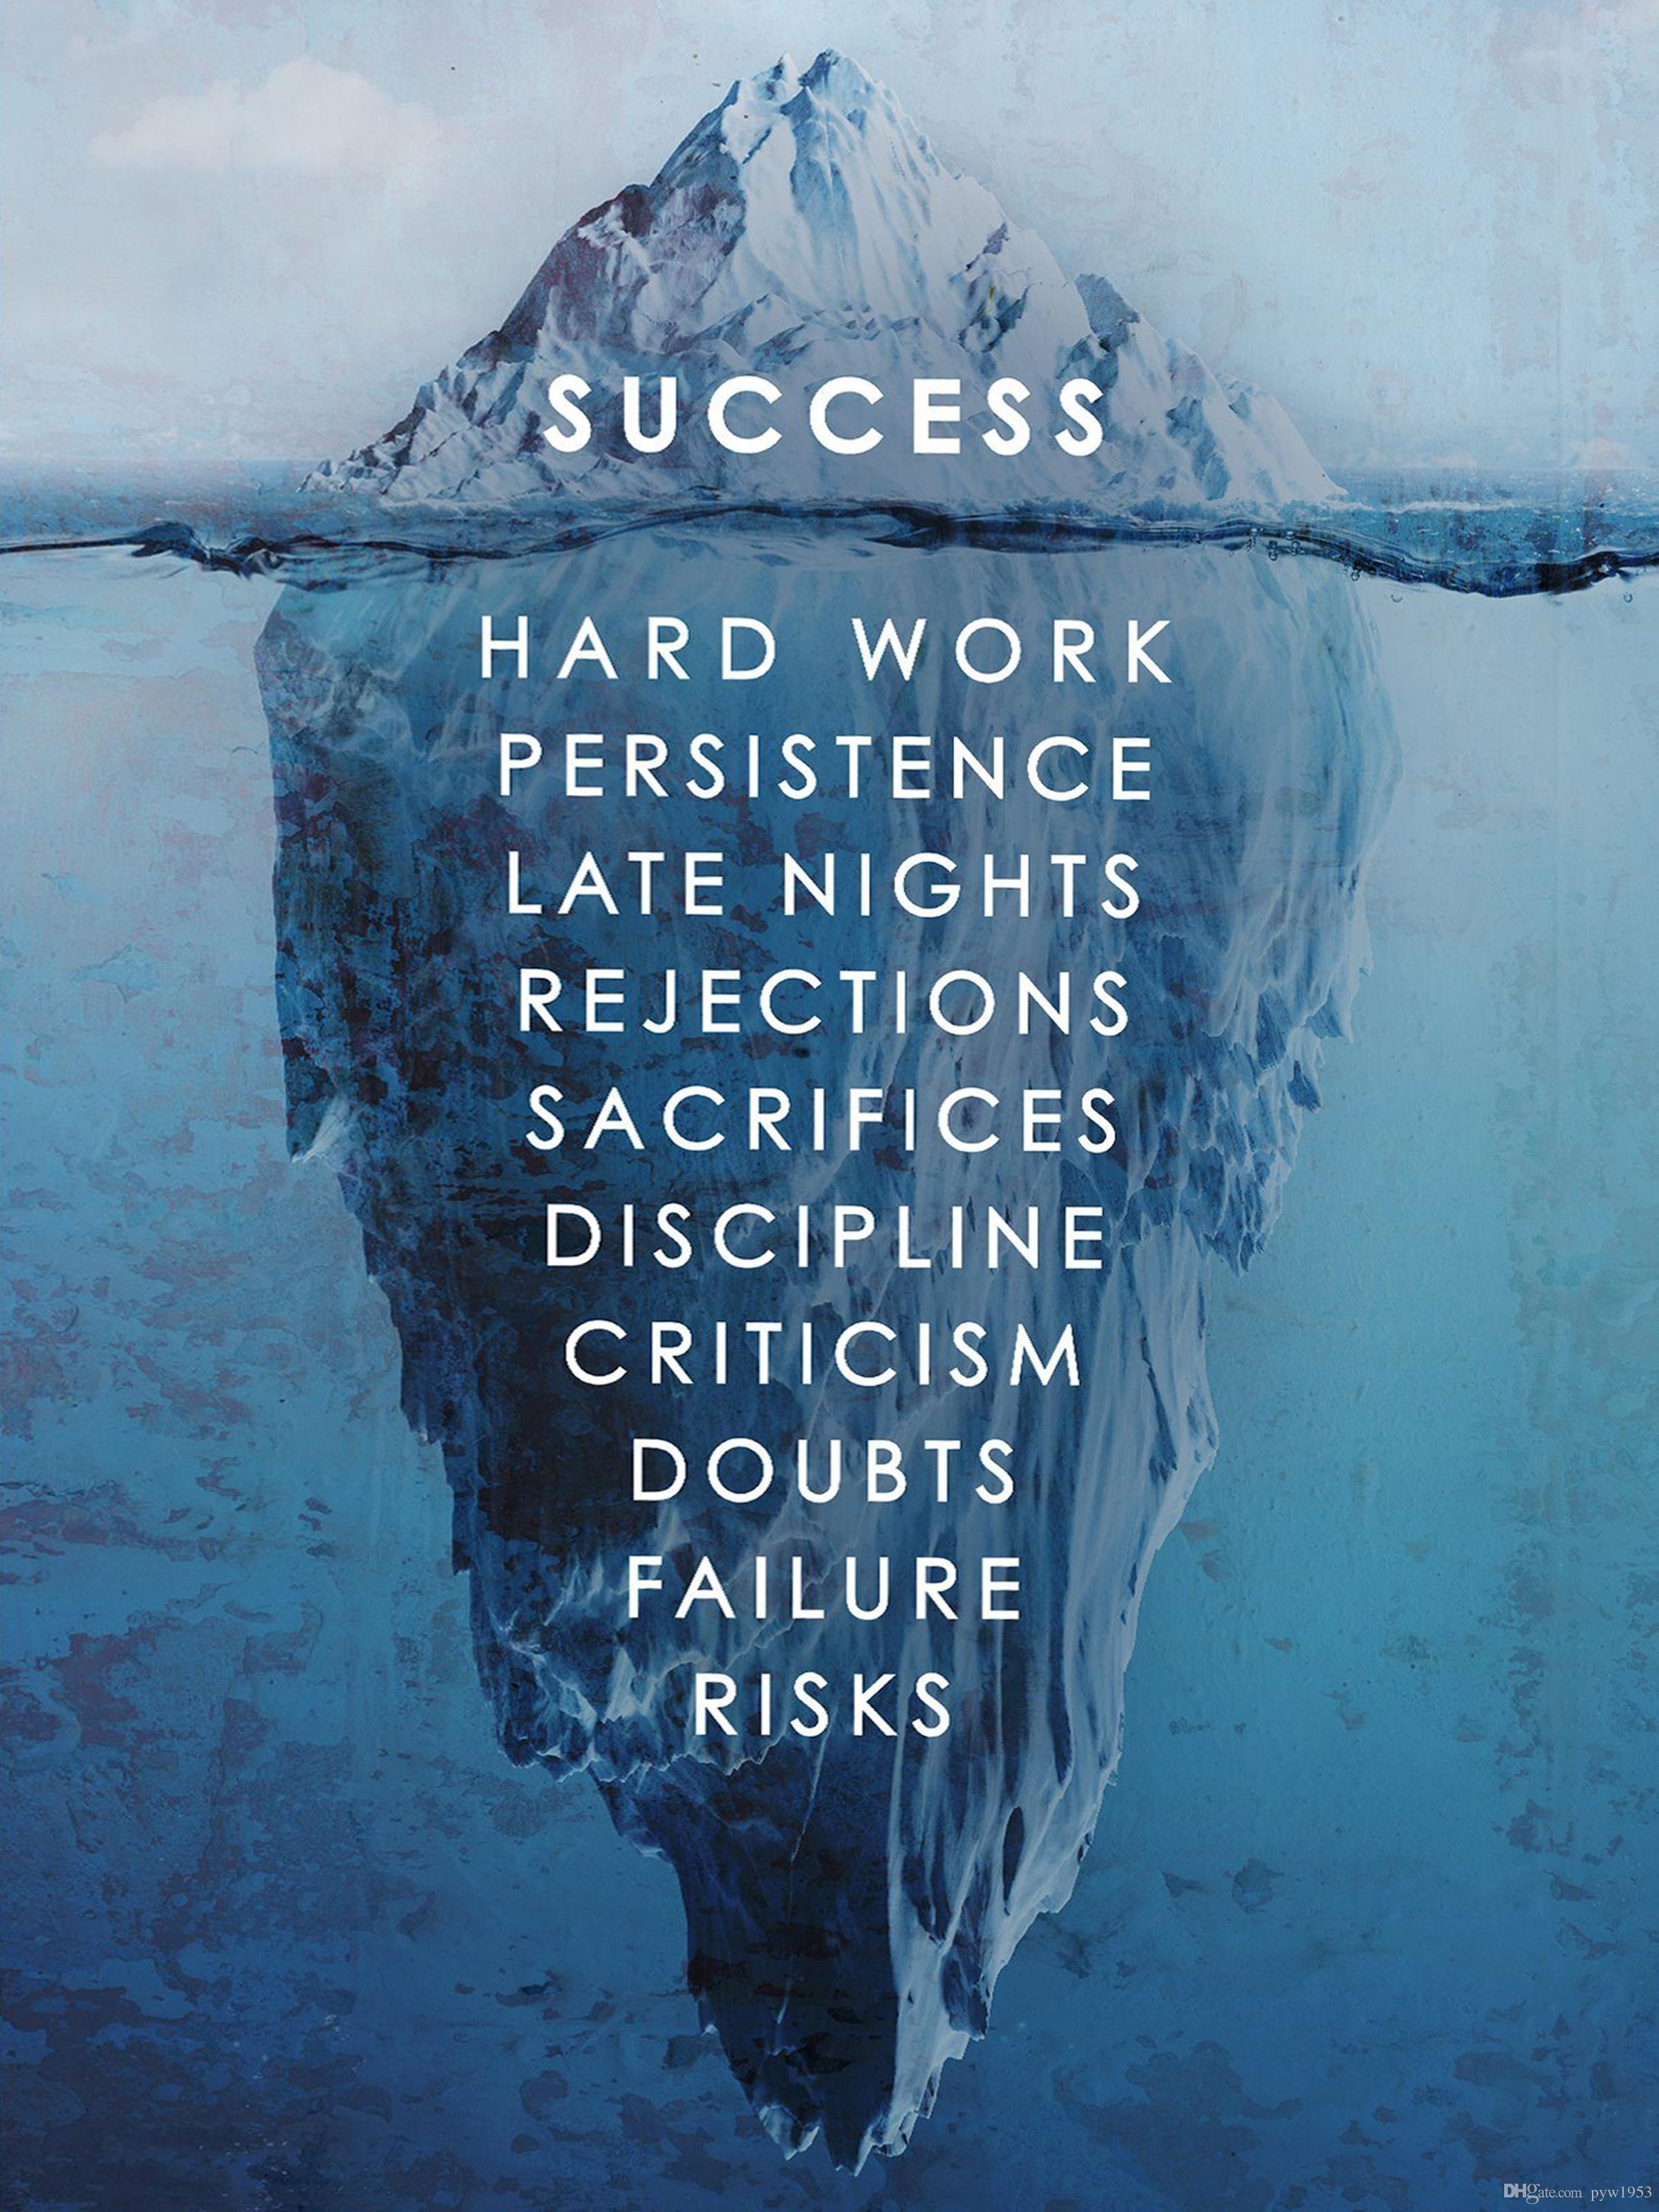 The success iceberg is one of my favourite personal growth/business concepts. It's a great way of picturing the reality behind what looks like easy success.